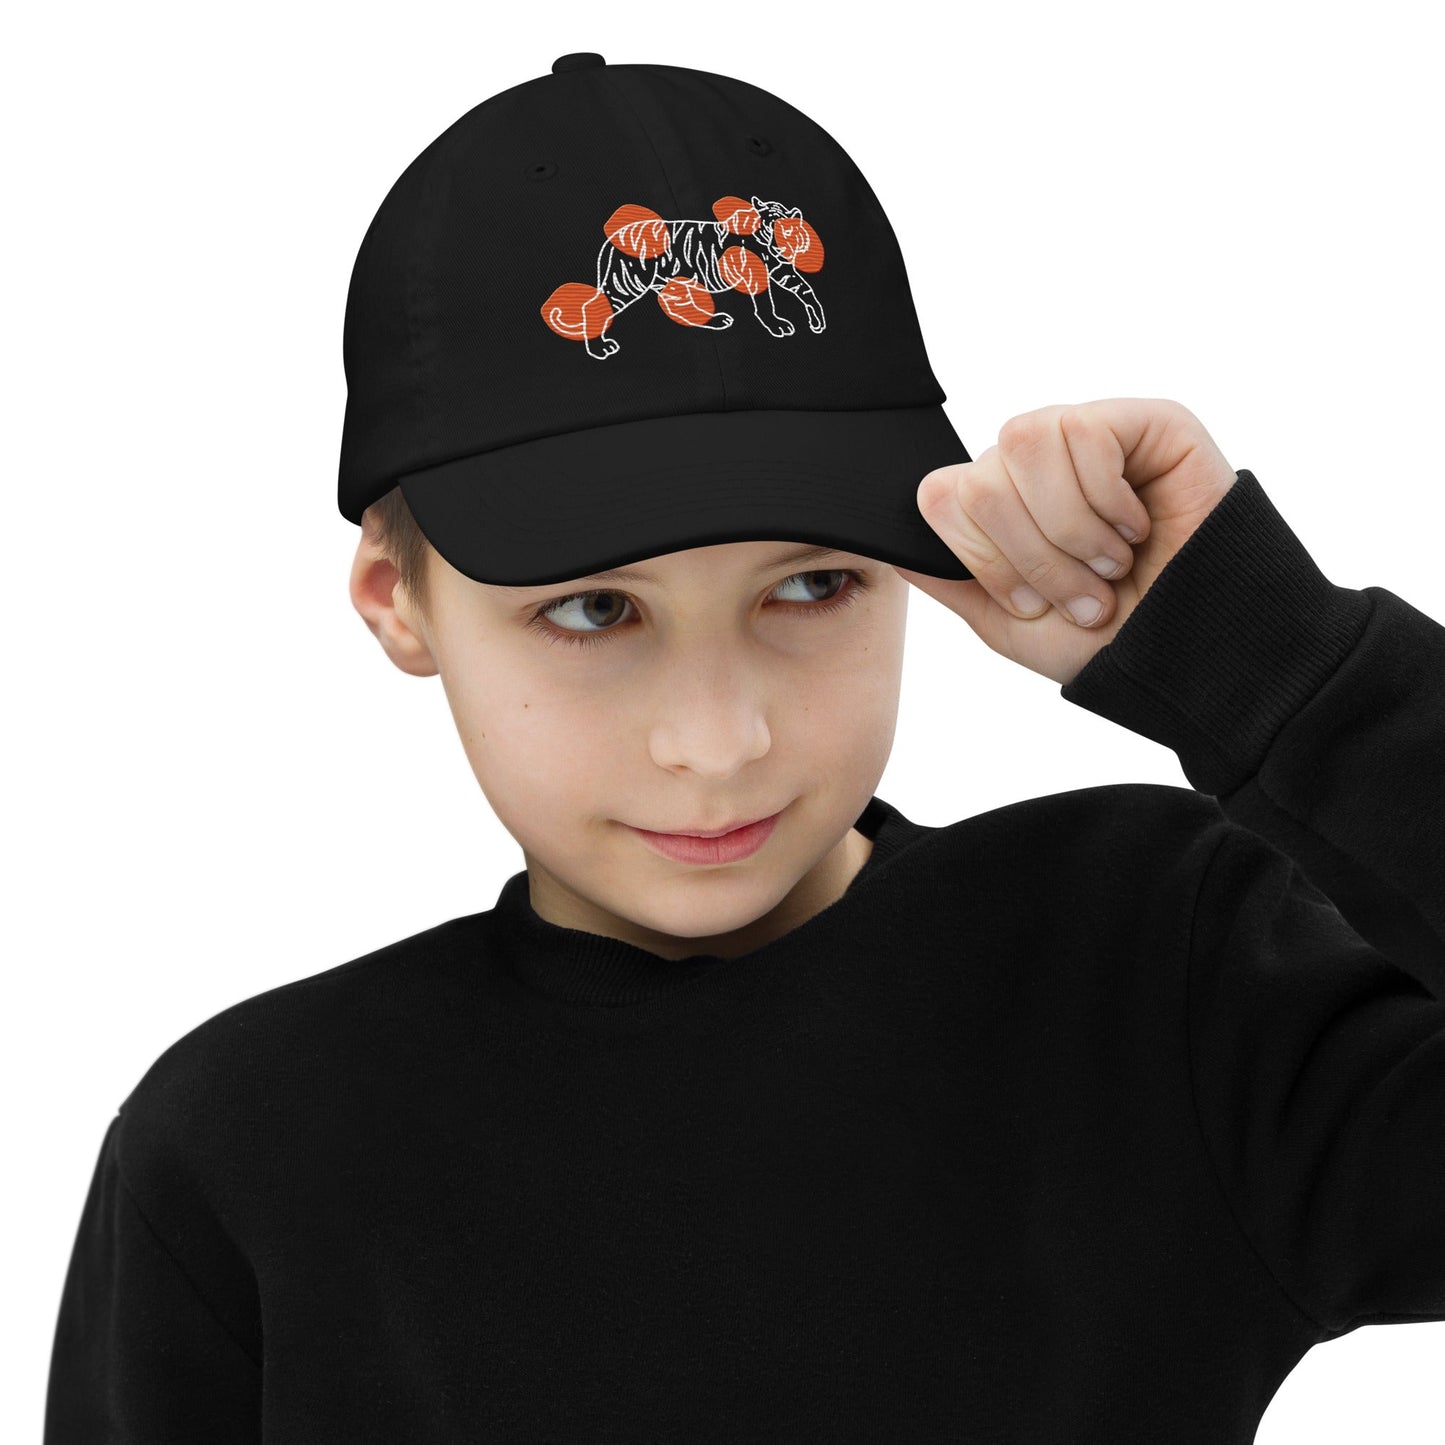 Tiger 🐅 Kids Baseball Hat Hats from Wildly Bright